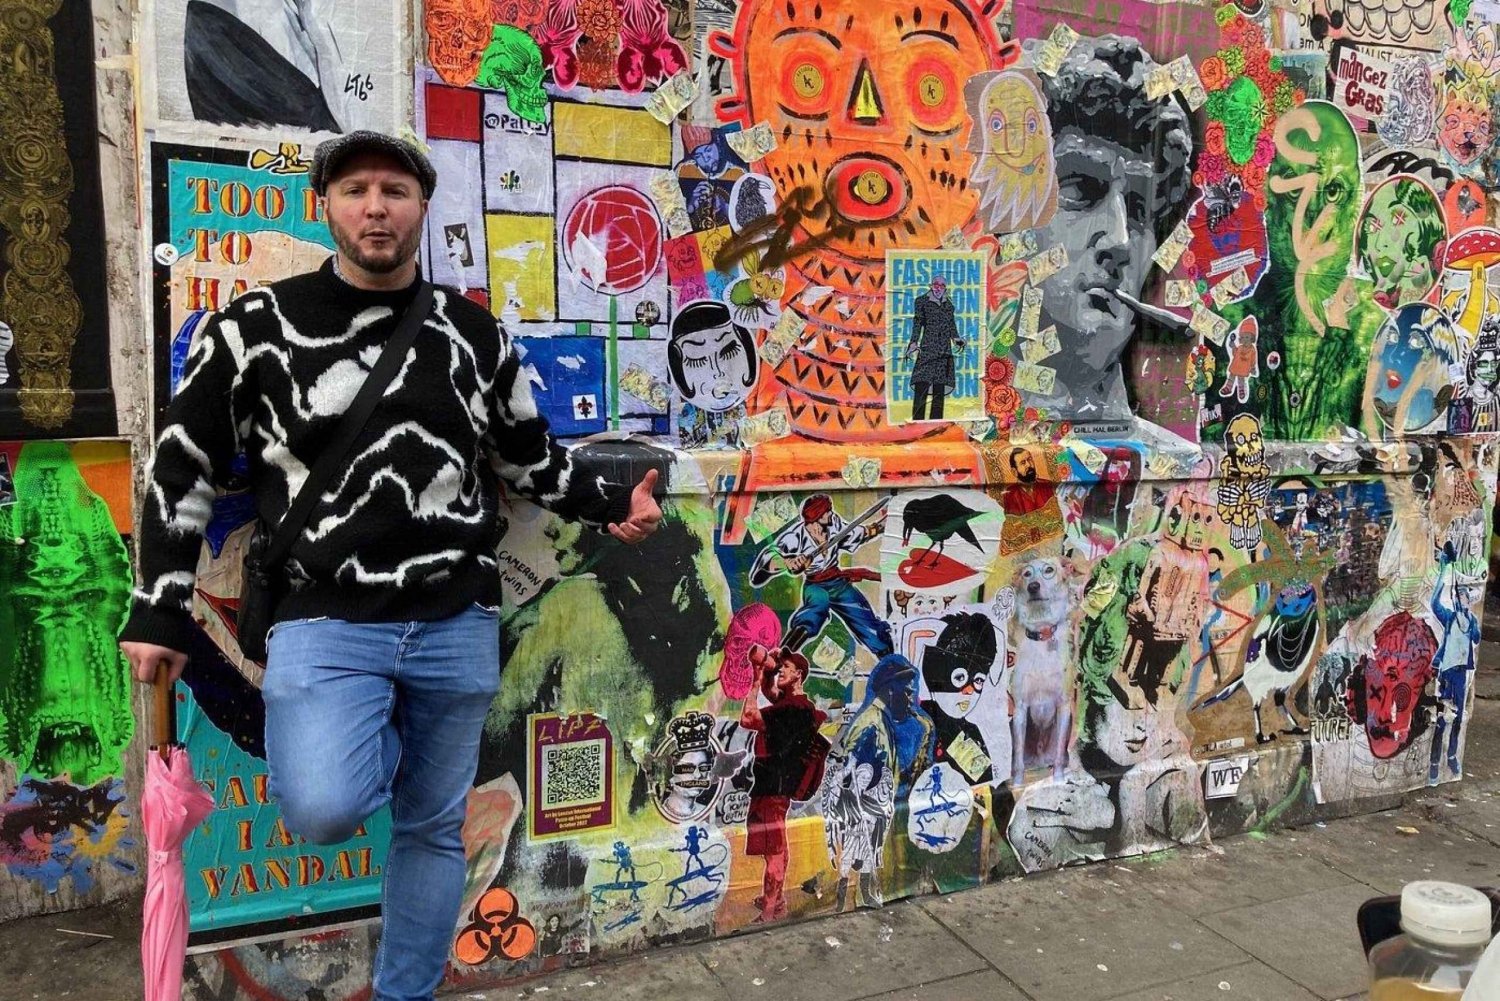 East End London Instagrammable Street Art and Graffiti Tour